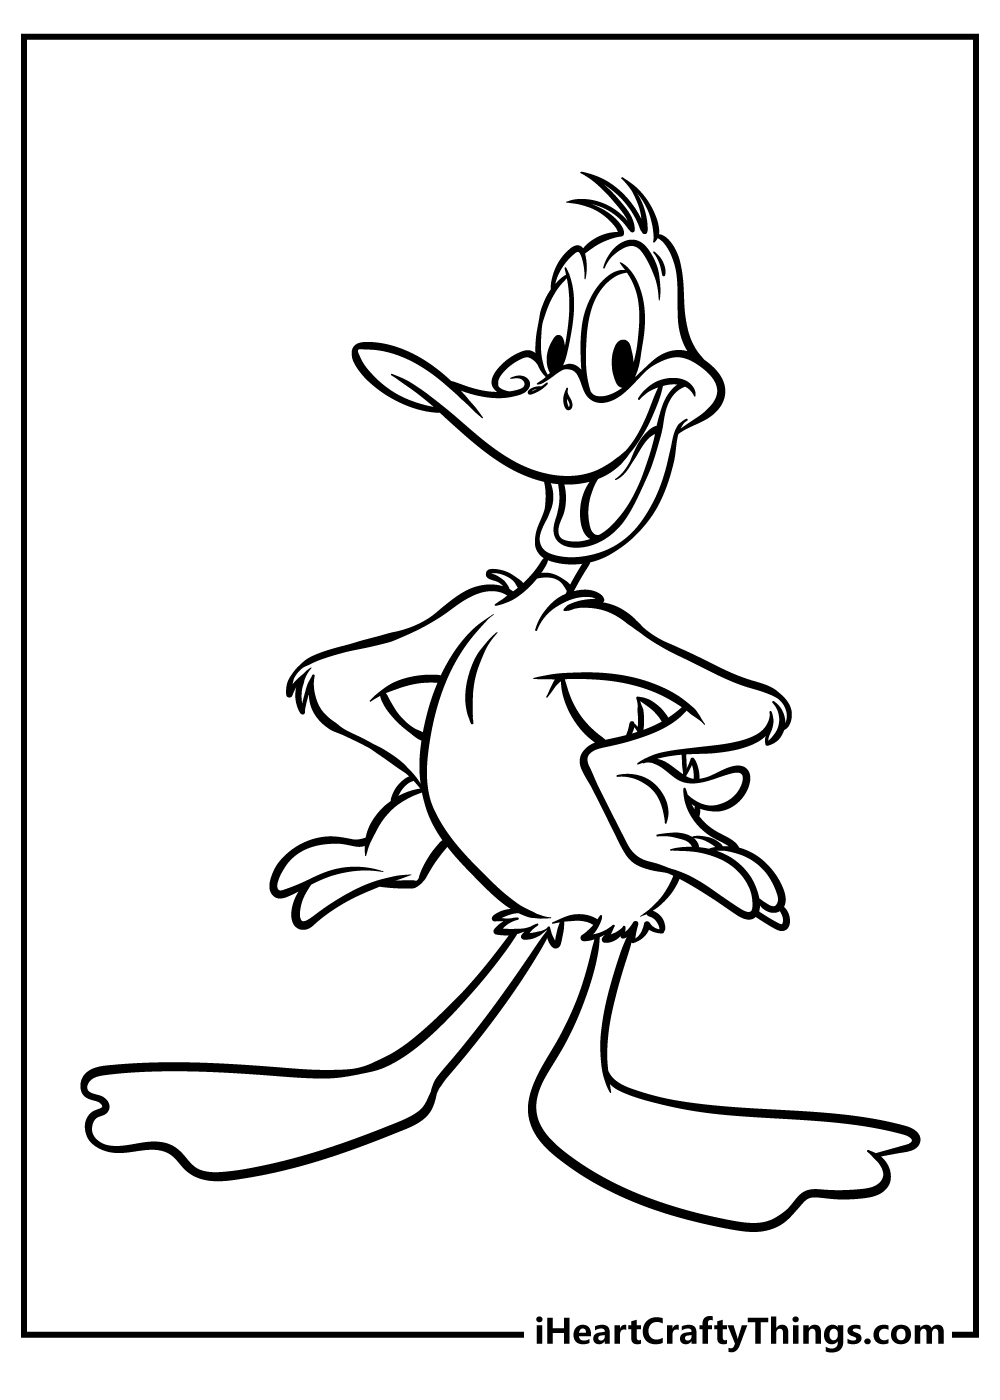 Looney tunes coloring pages free printables